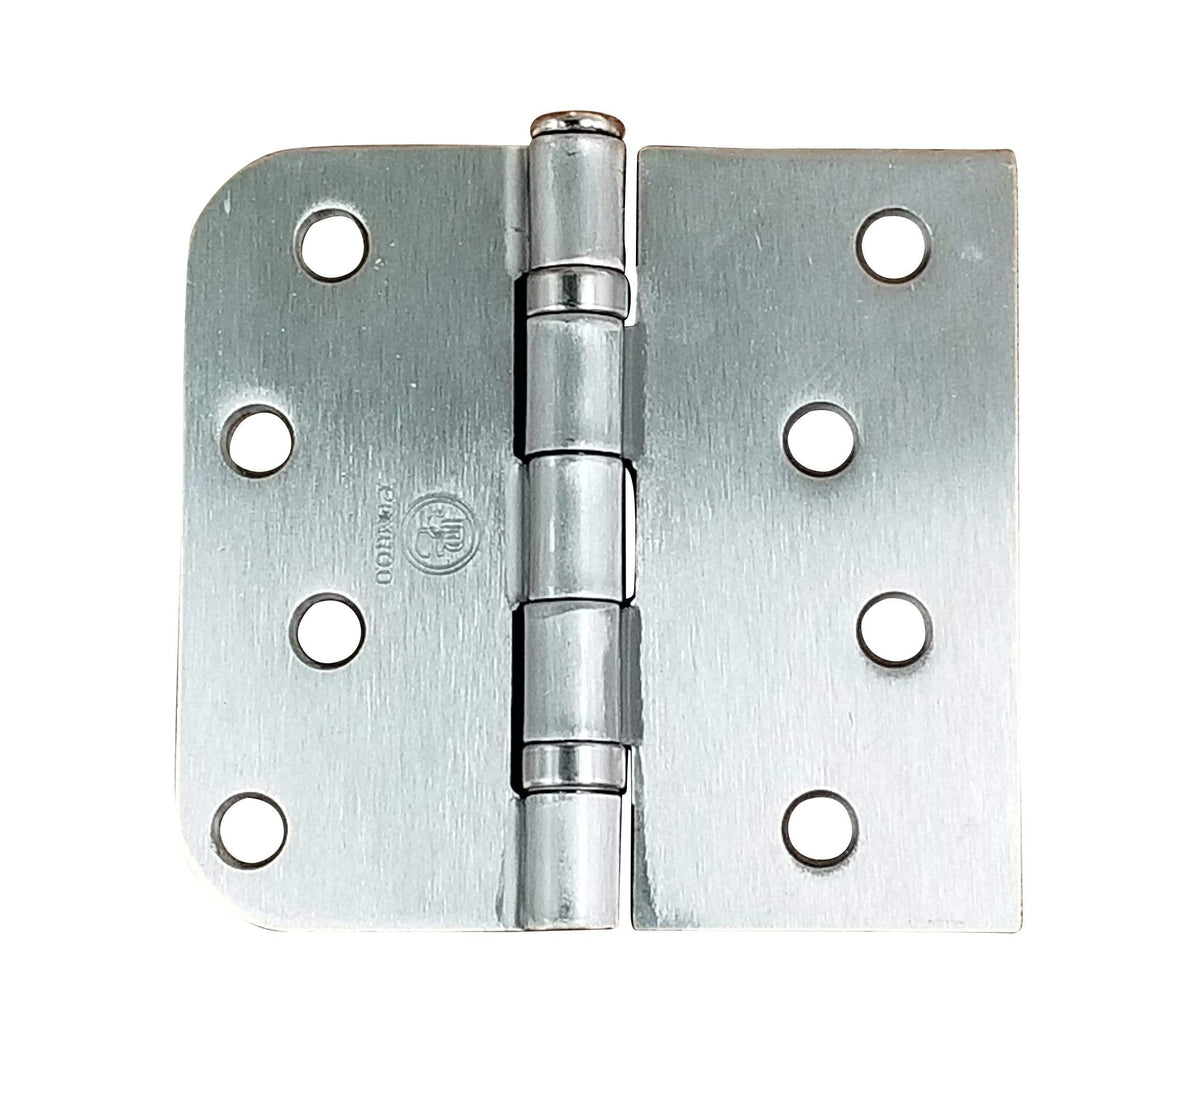 Satin Nickel Ball Bearing Door Hinges - 4" Inch X 4.25" Inch With 5/8" Inch Square - 2 Pack